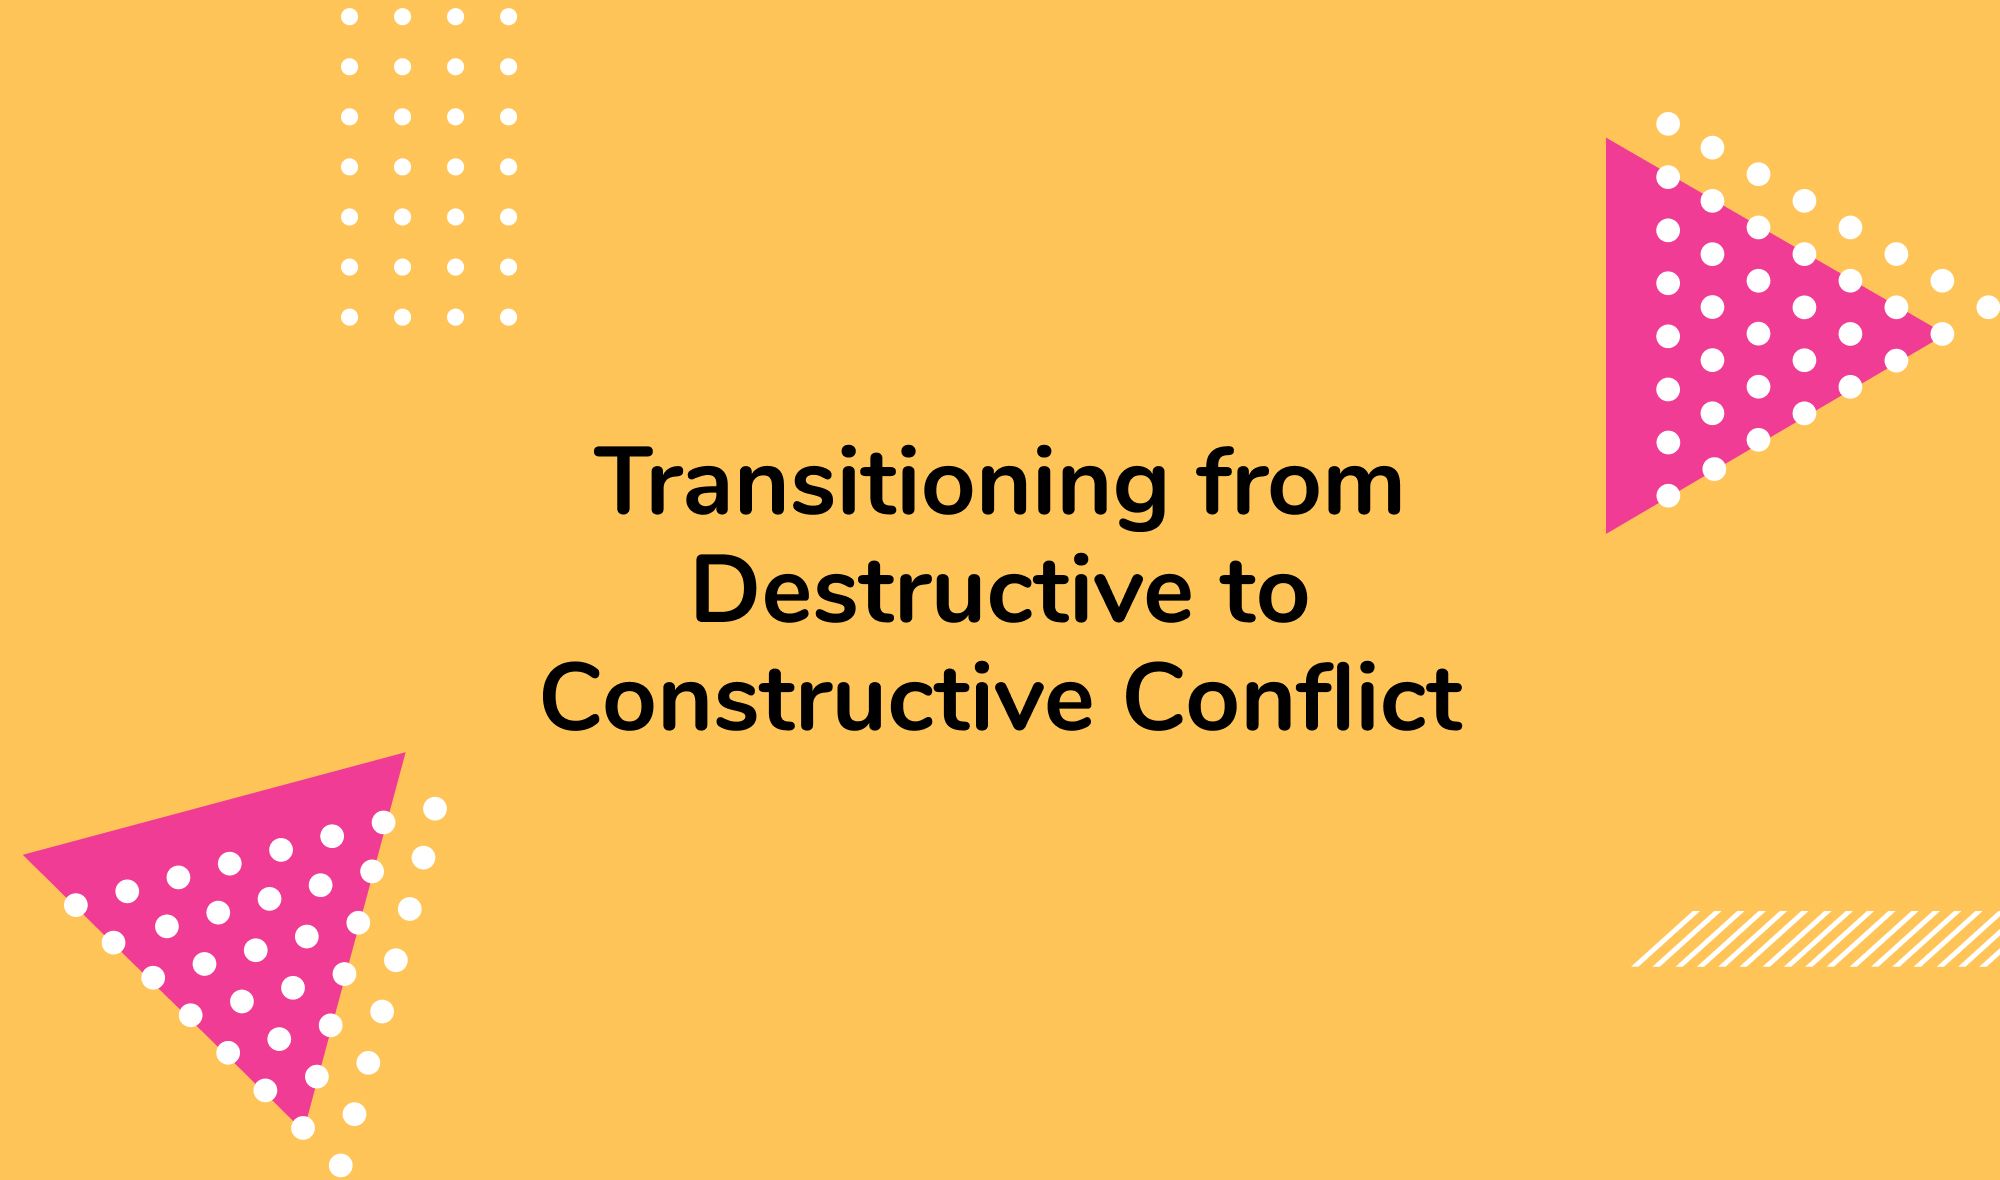 Transitioning from Destructive to Constructive Conflict